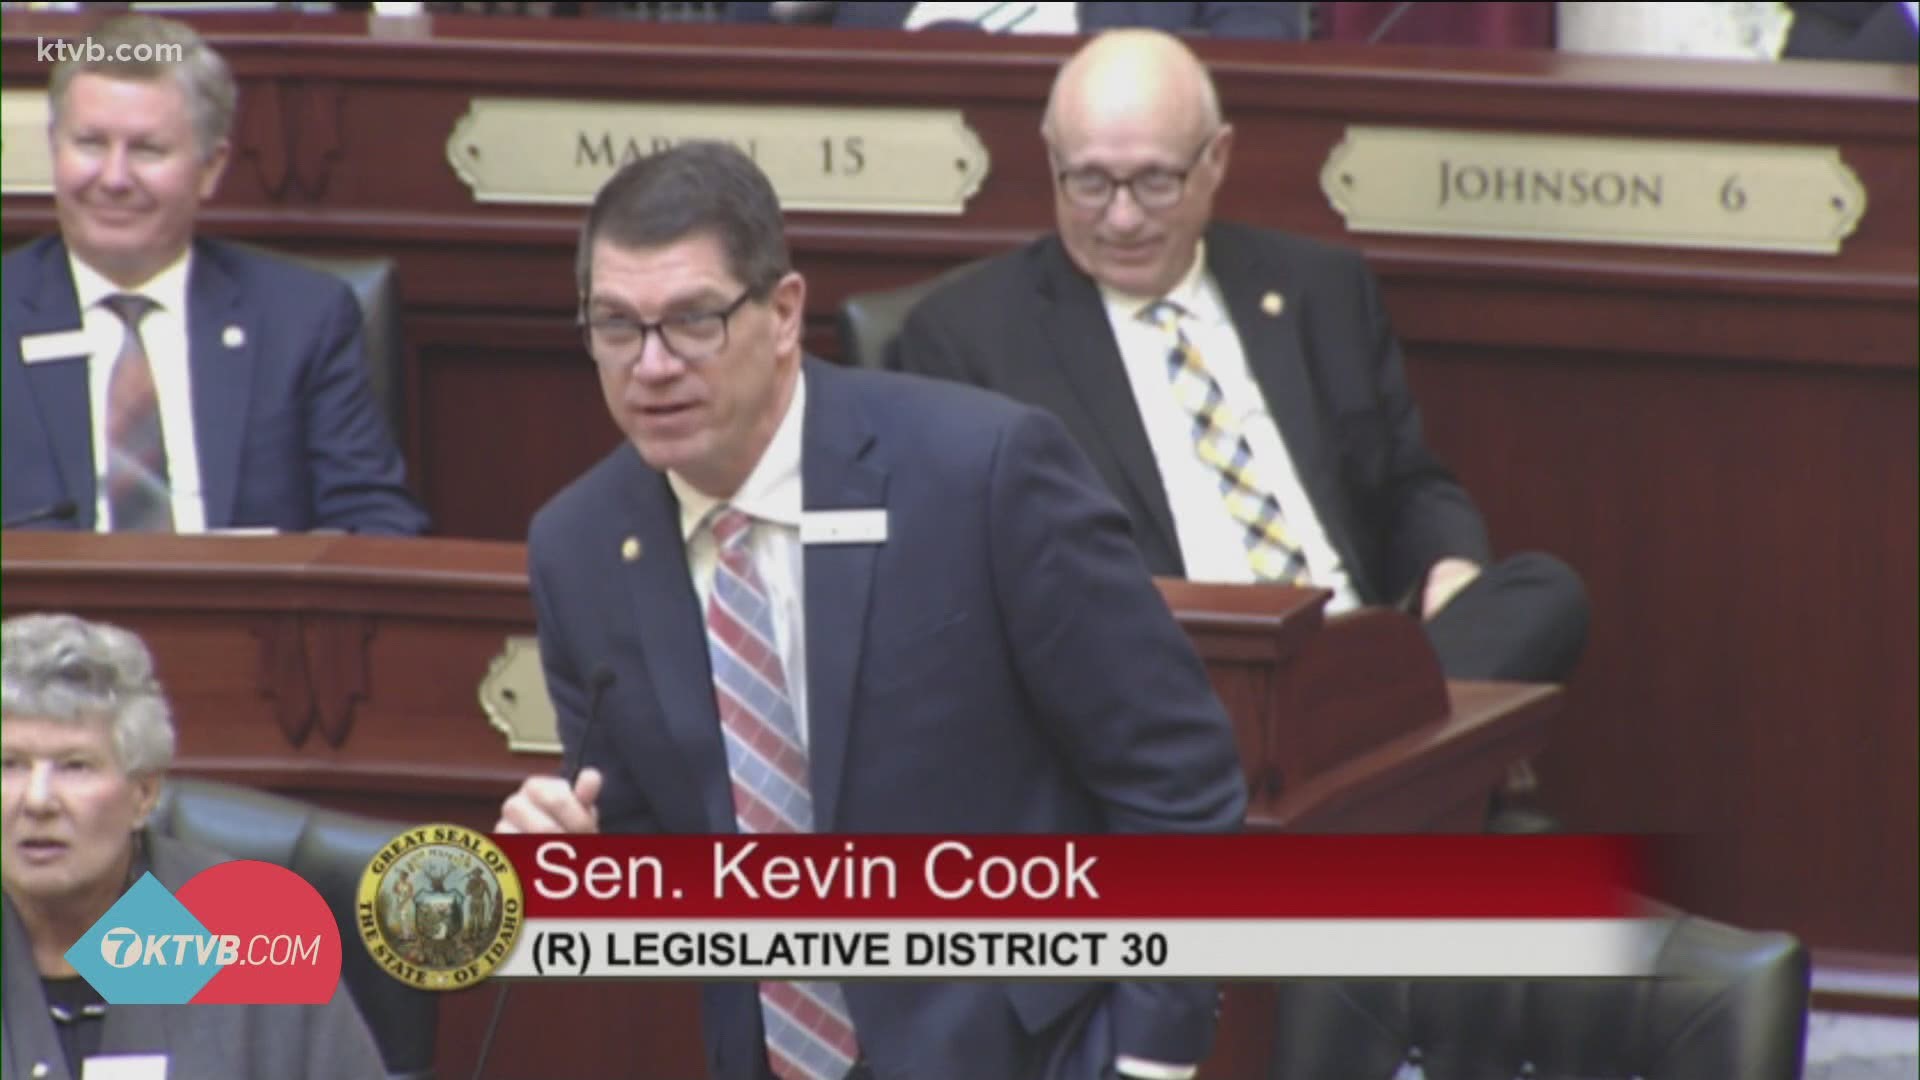 Sen. Kevin Cook (R-Idaho Falls) decided to try to get his daughter a date after the Idaho Senate adjourned for its COVID-19 induced recess.